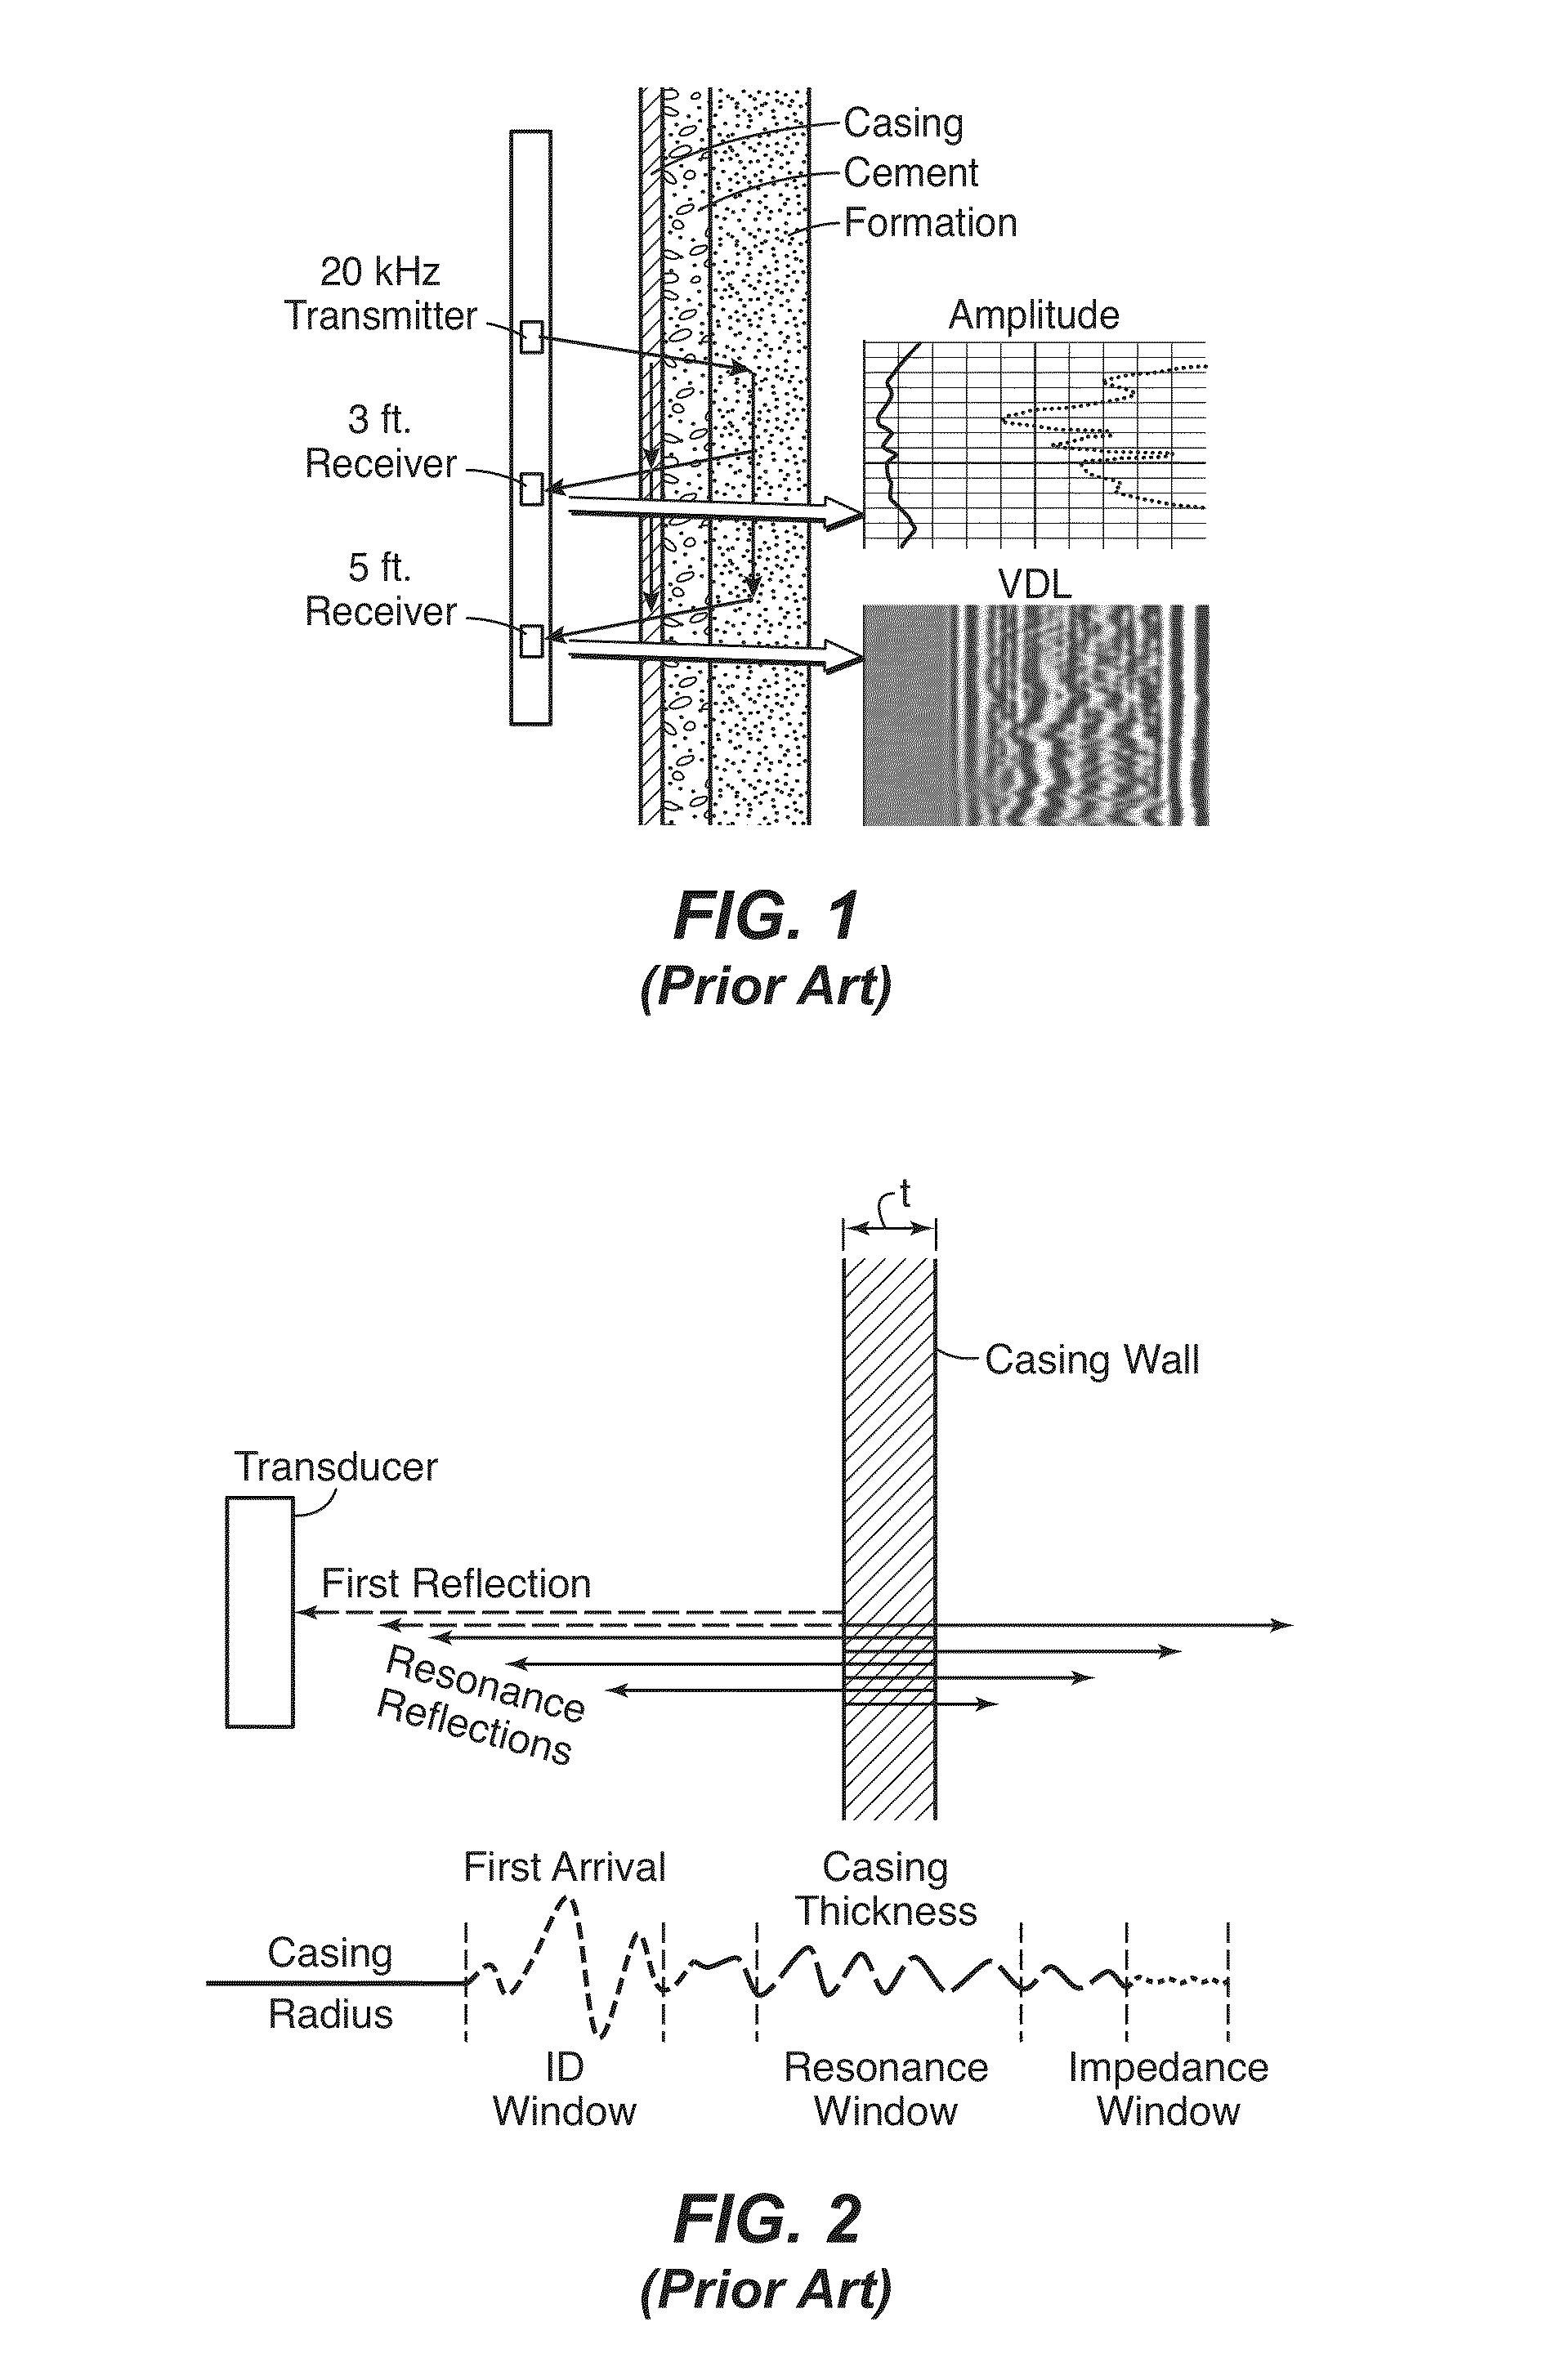 Method for Cement Evaluation with Acoustic and Nuclear Density Logs